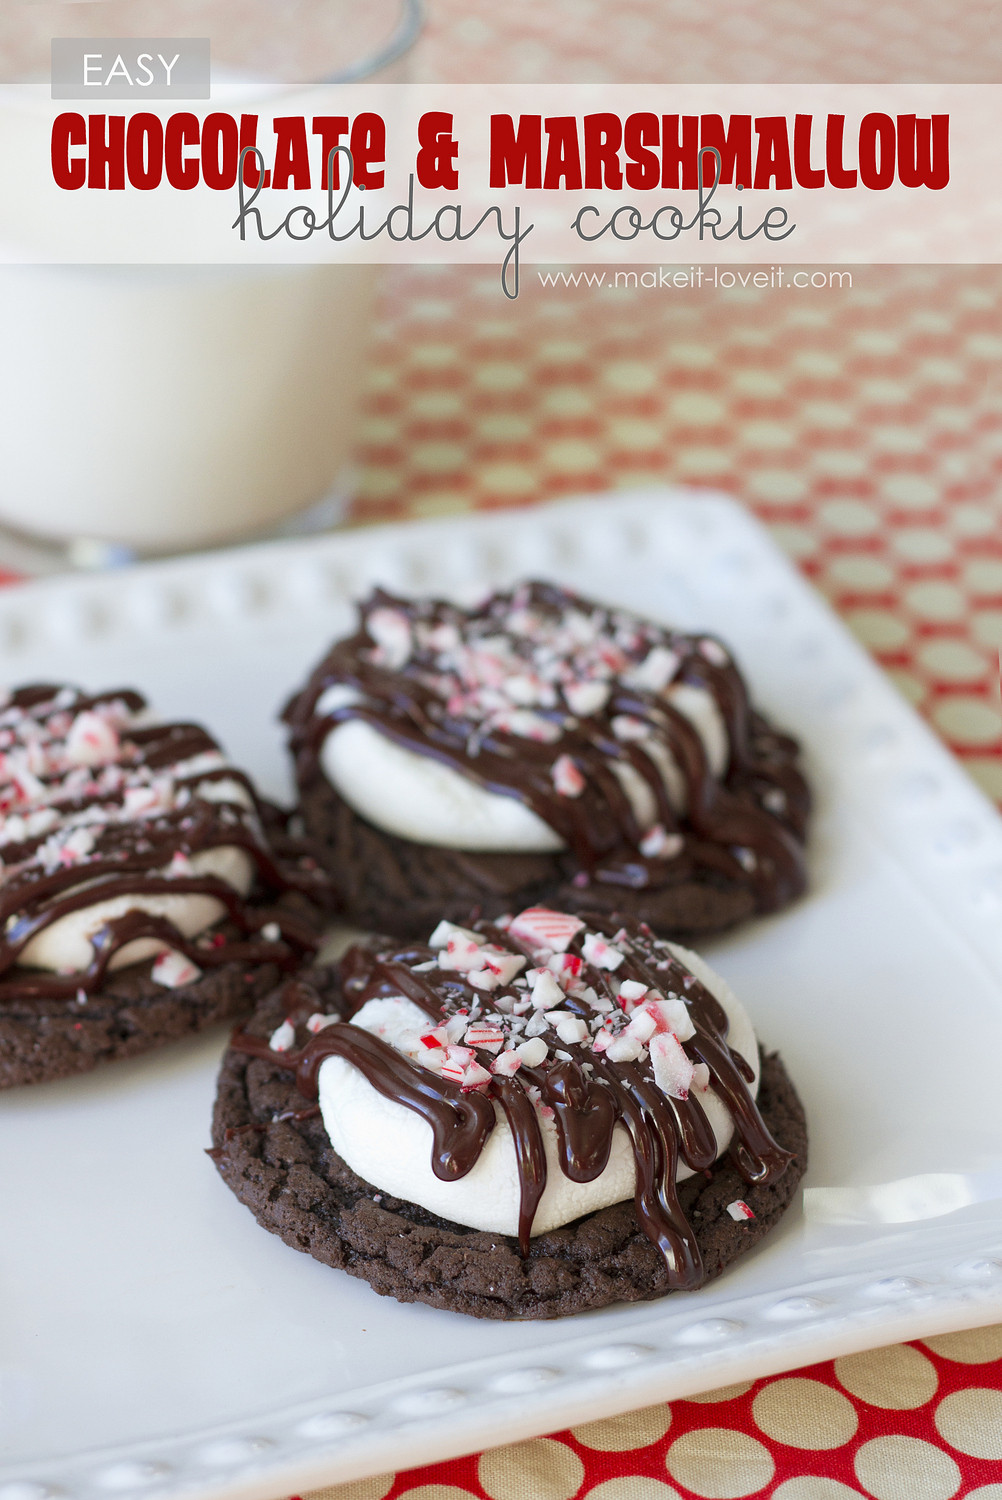 Easy Christmas Cookies And Candy
 EASY Chocolate & Marshmallow Holiday Cookie plus a